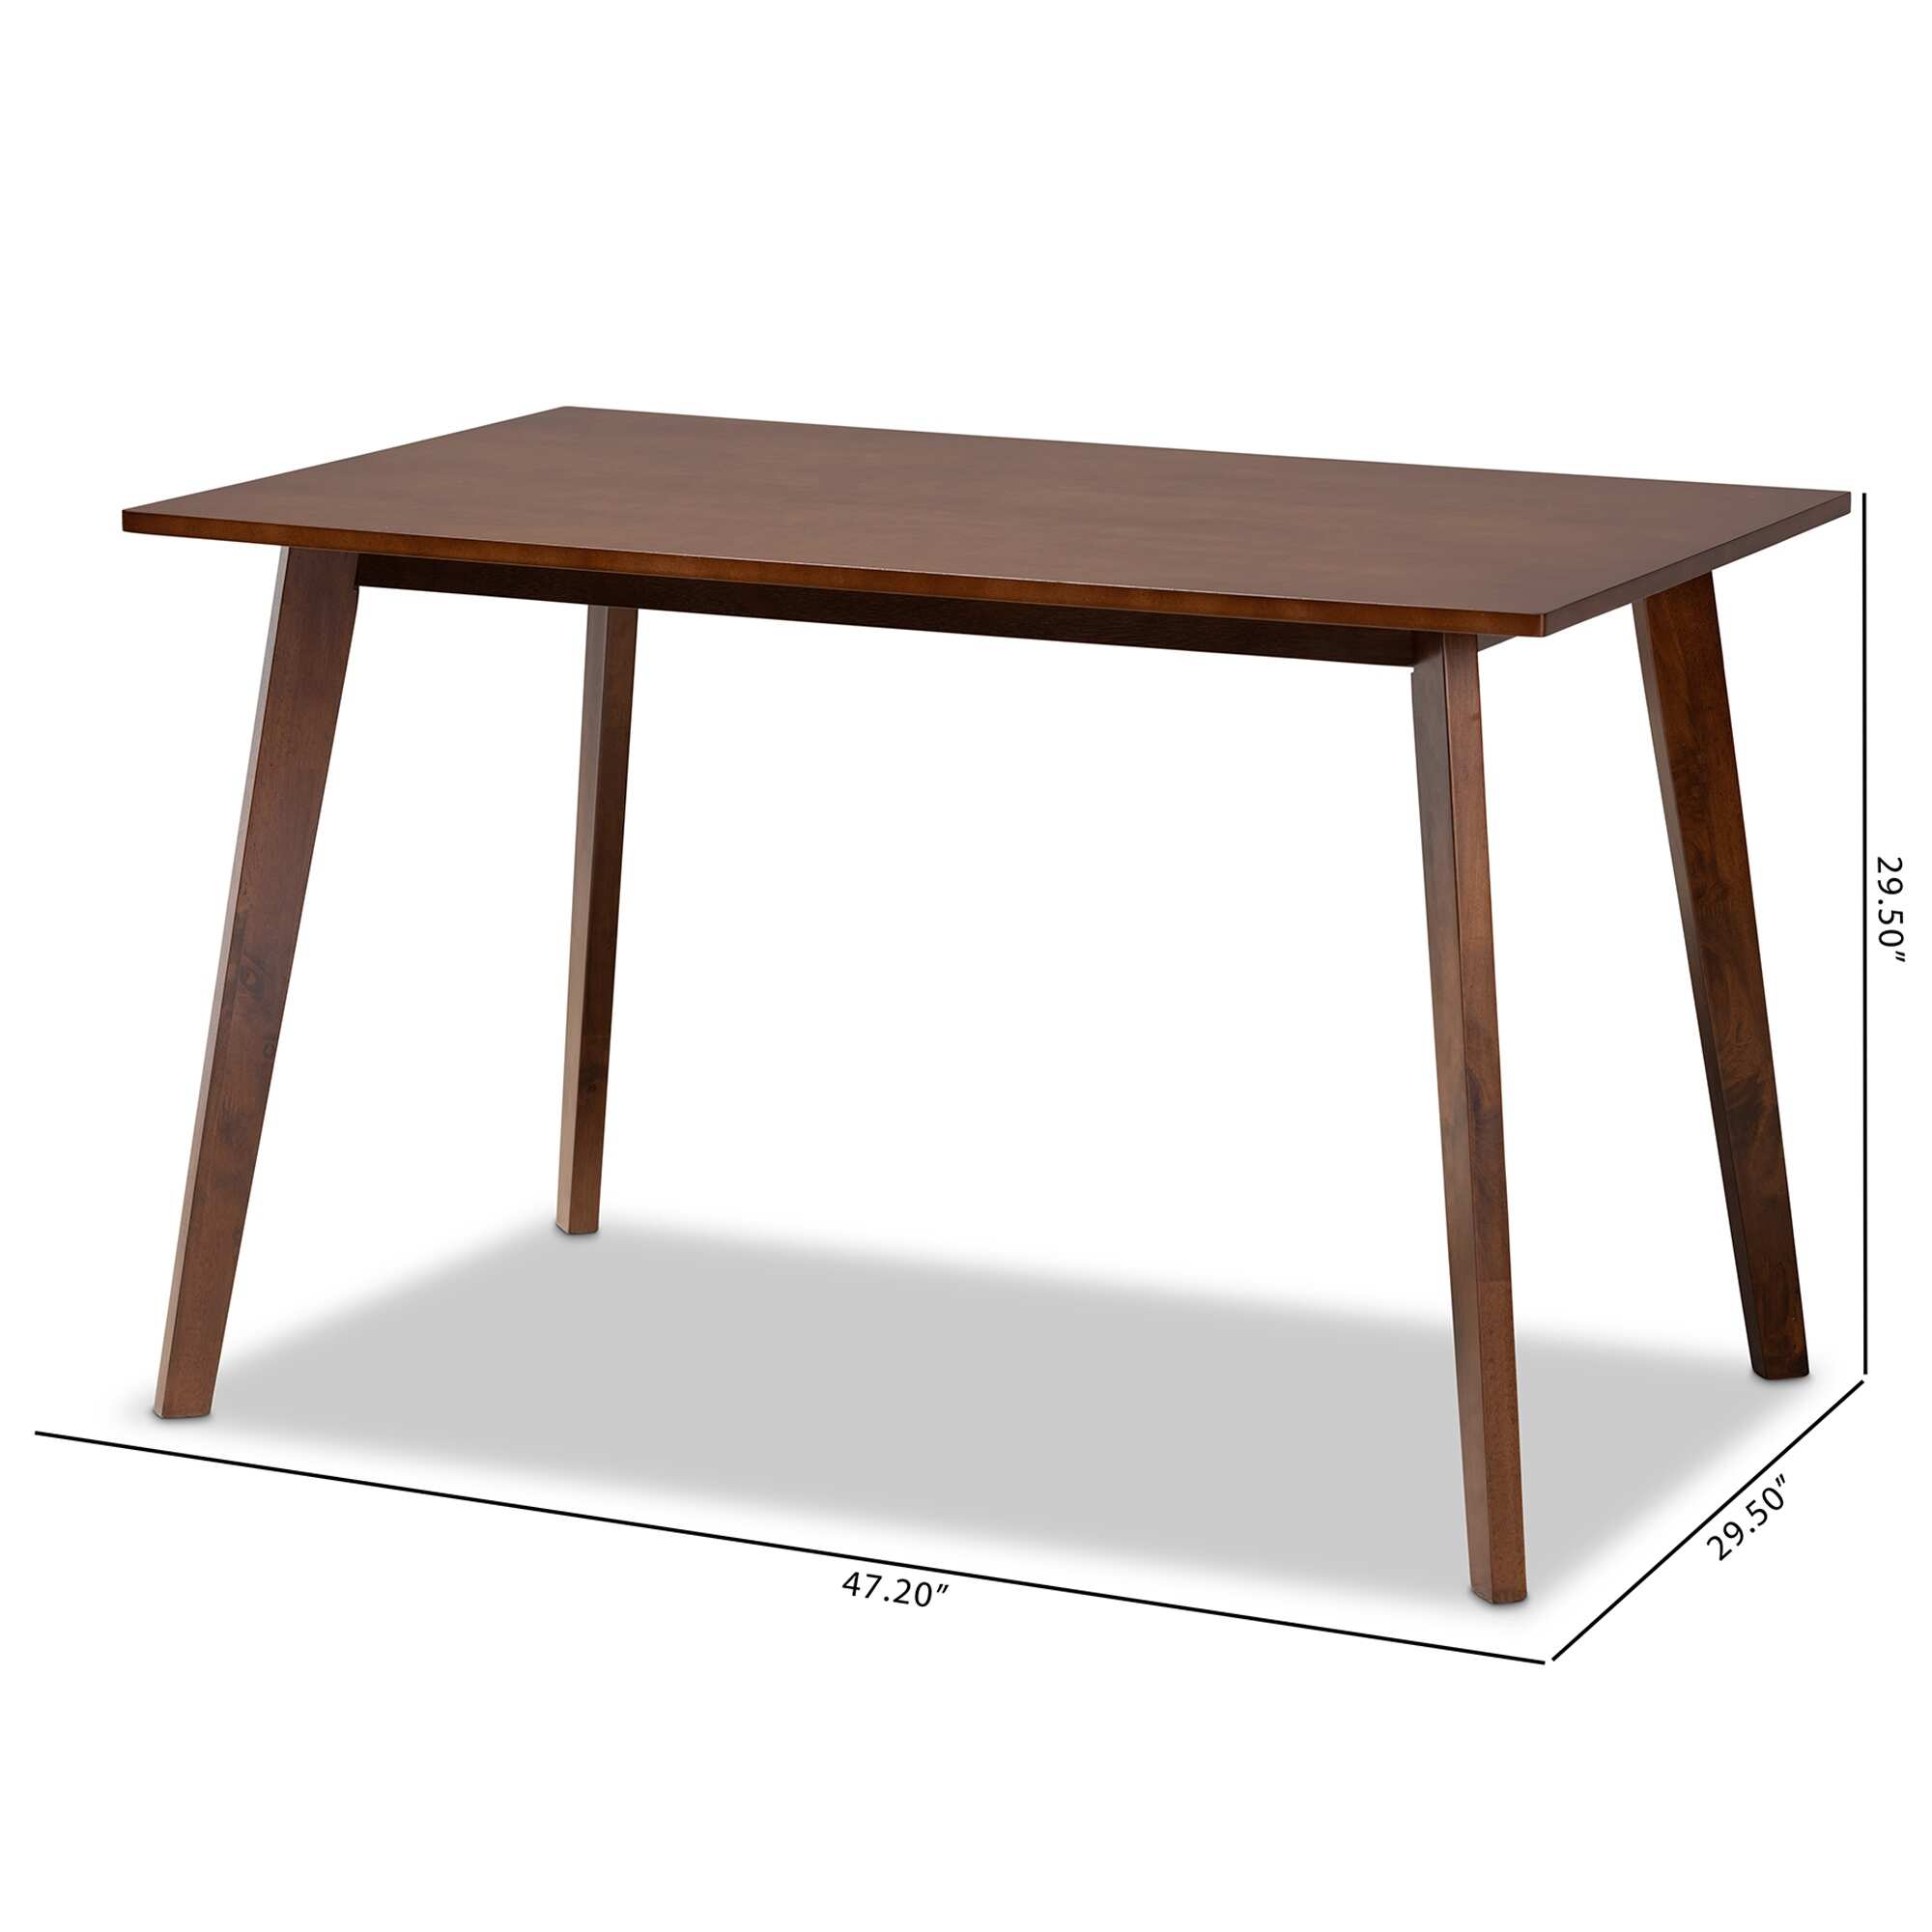 Britte Mid-Century Modern Transitional Rectangular Wood Dining Table